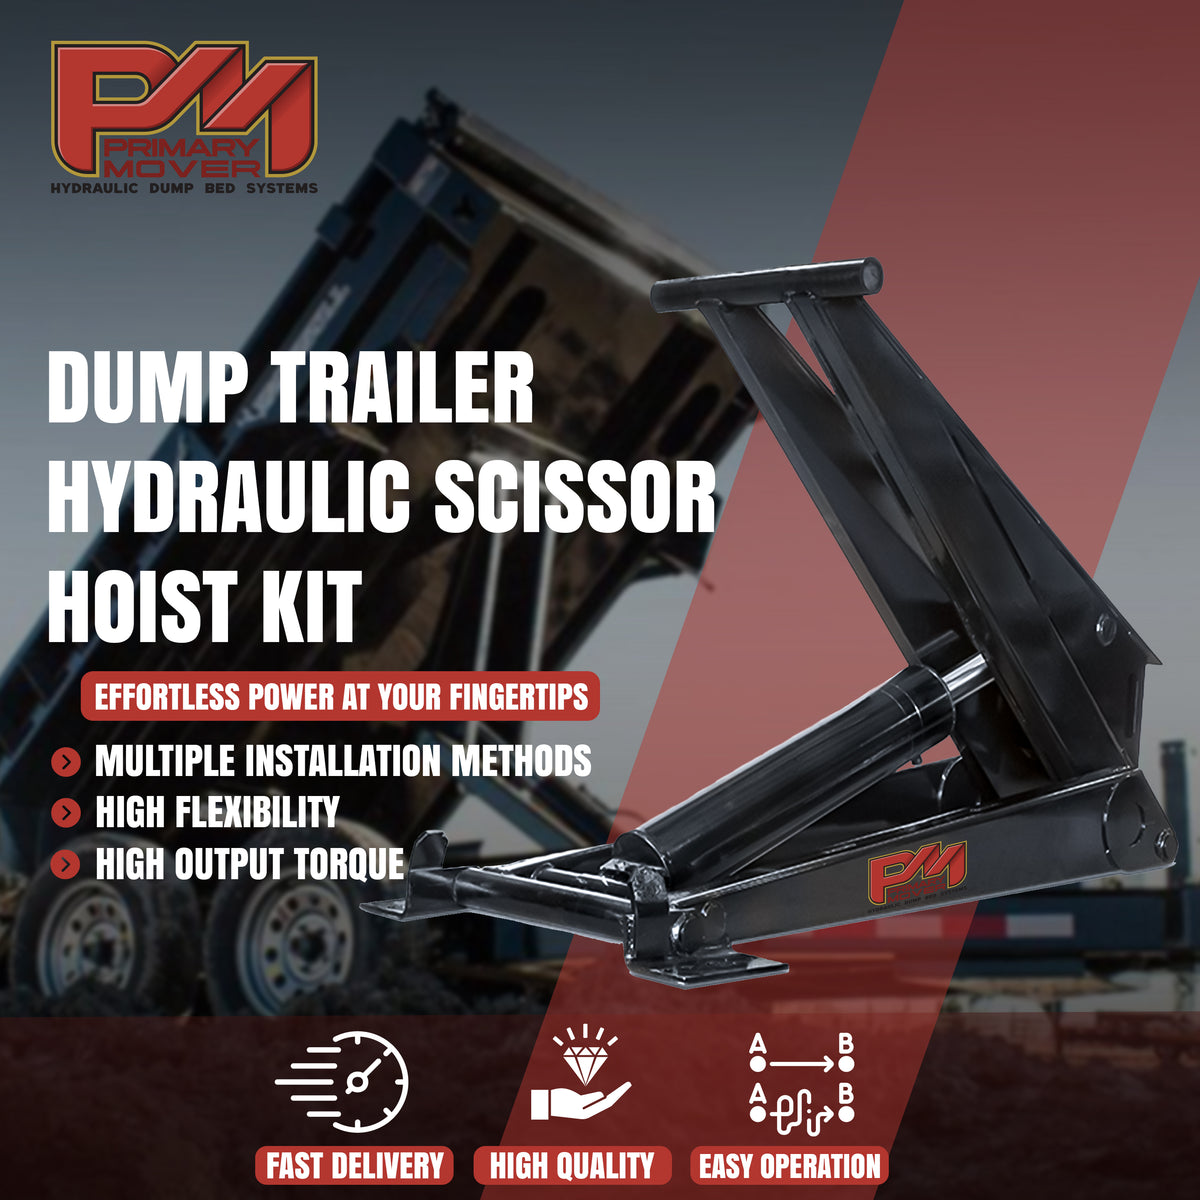 Hydraulic Scissor Hoist Kit - 12 Ton Capacity - Fits 18-24' Dump Body | PF-630: Reliable and durable trailer hoist with 3-year warranty. Includes cylinder, mounting brackets, hydraulic pump, safety features, and more.